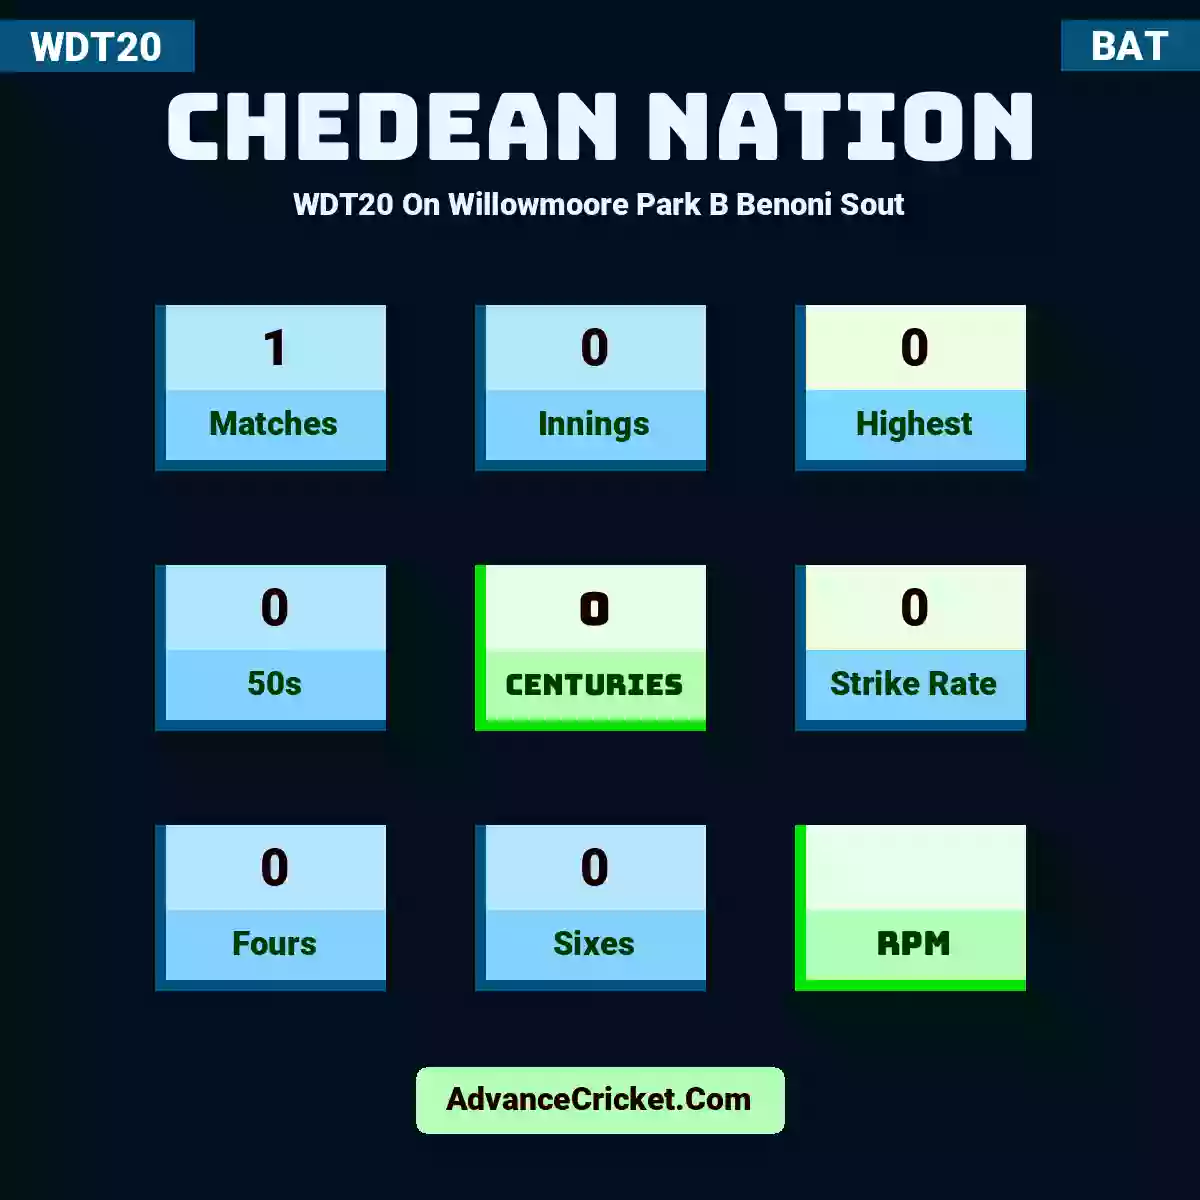 Chedean Nation WDT20  On Willowmoore Park B Benoni Sout, Chedean Nation played 1 matches, scored 0 runs as highest, 0 half-centuries, and 0 centuries, with a strike rate of 0. C.Nation hit 0 fours and 0 sixes.